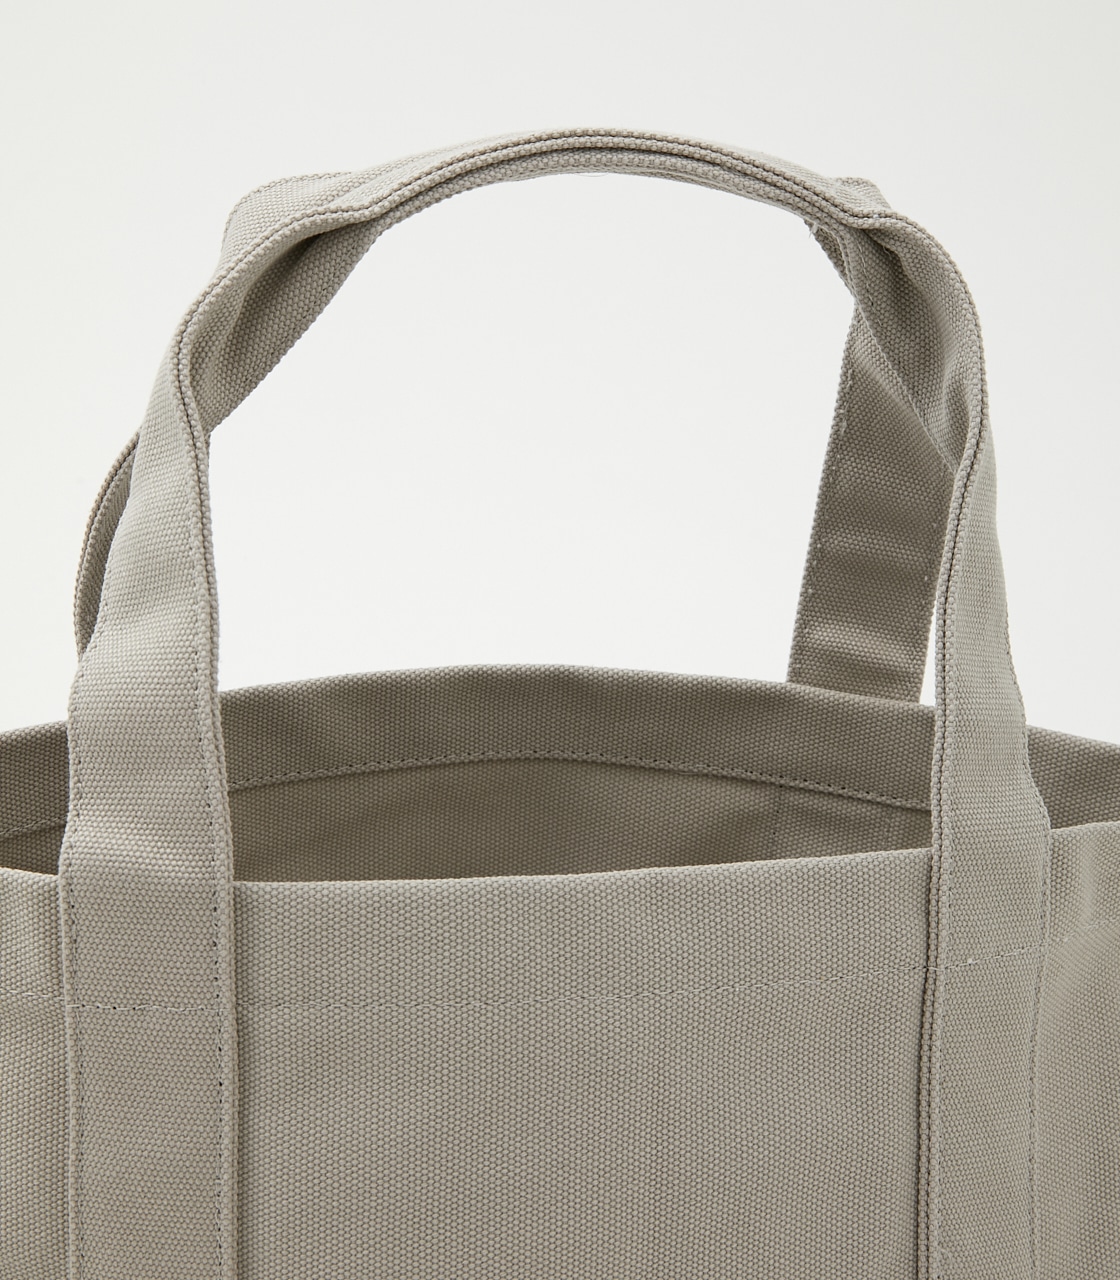 AZUL CANVAS TOTE BAG/AZULキャンバストートバッグ 詳細画像 L/GRY 6